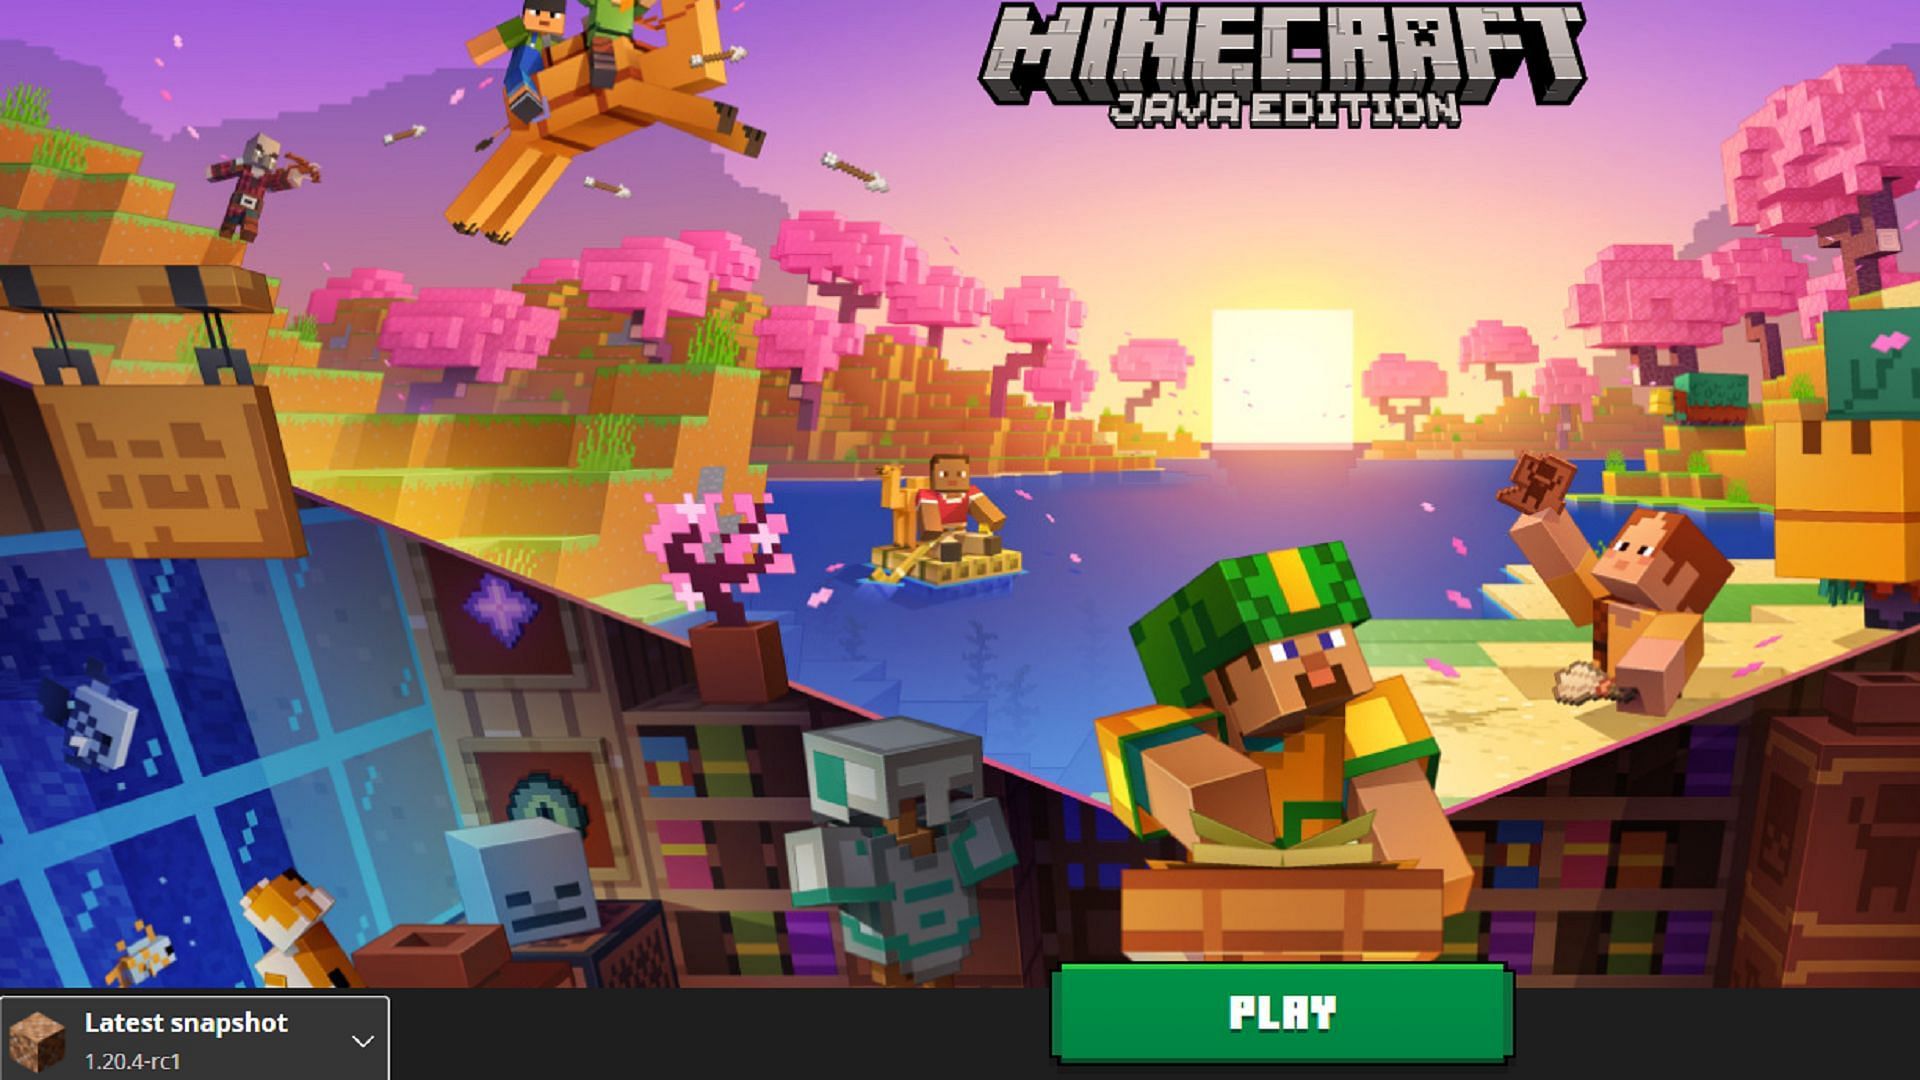 The Minecraft Launcher allows for quick access to the latest snapshots, pre-releases, and release candidates (Image via Mojang)